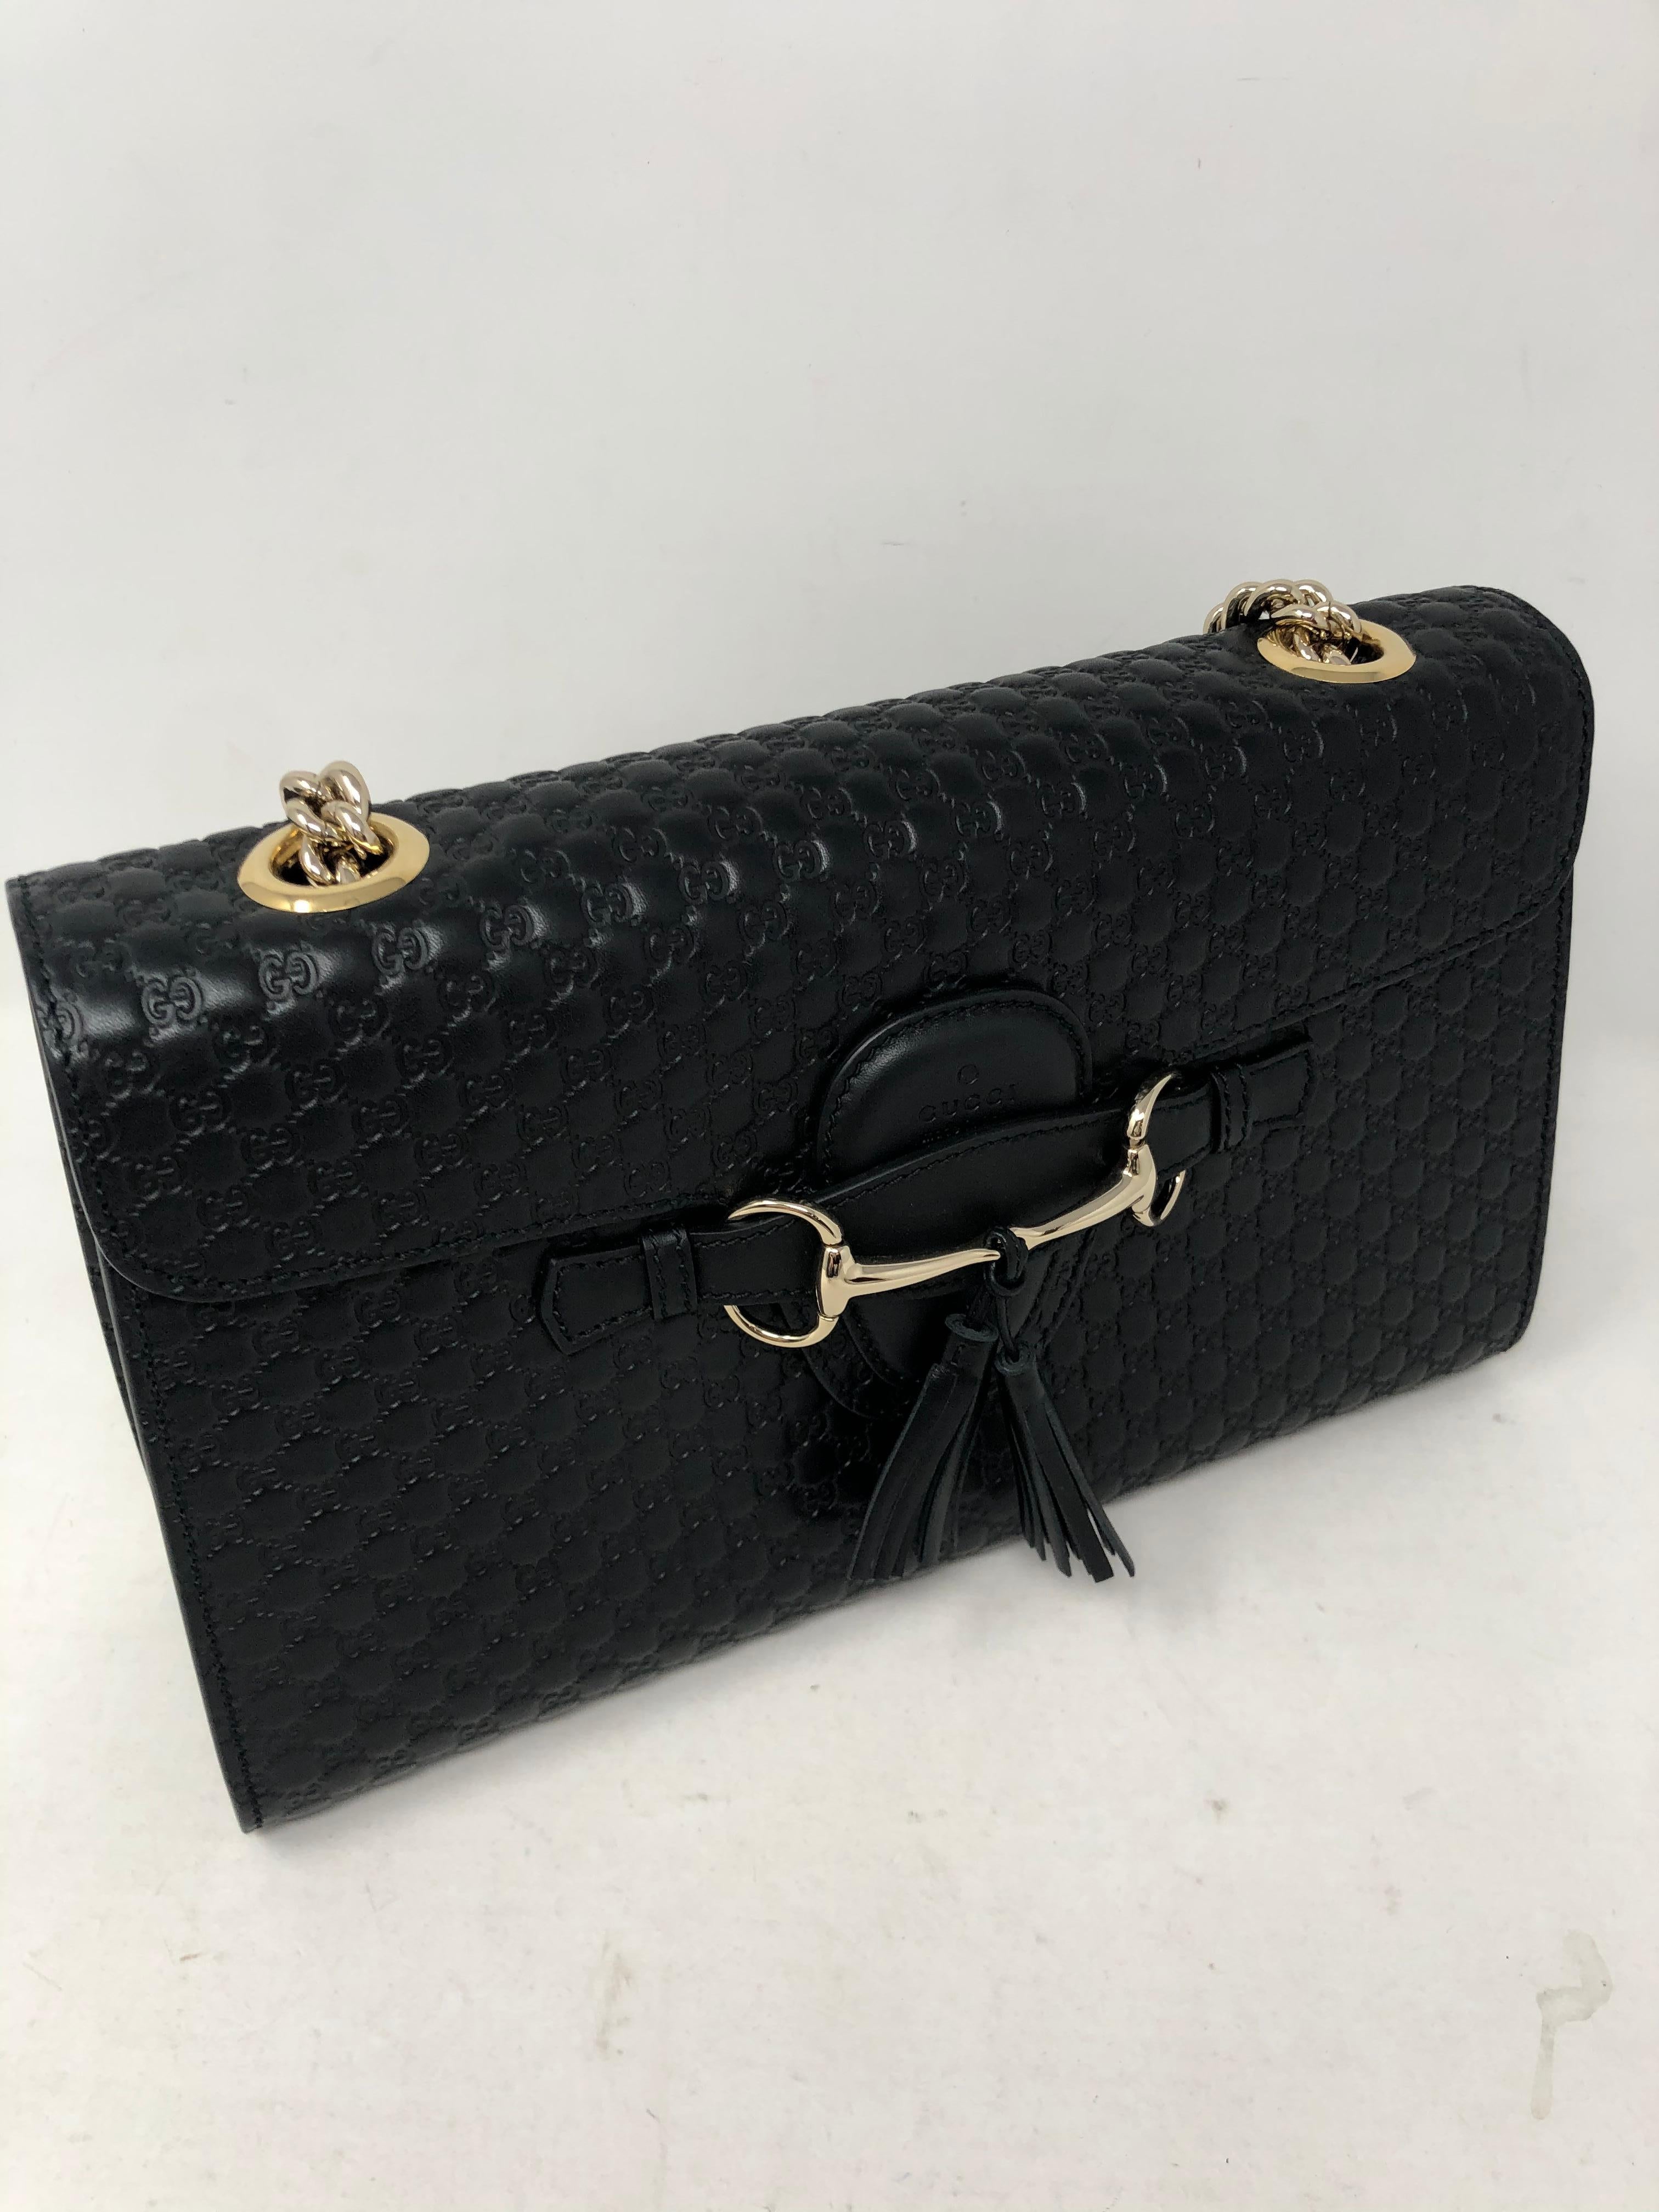 Gucci Embossed Black Leather Bag 5